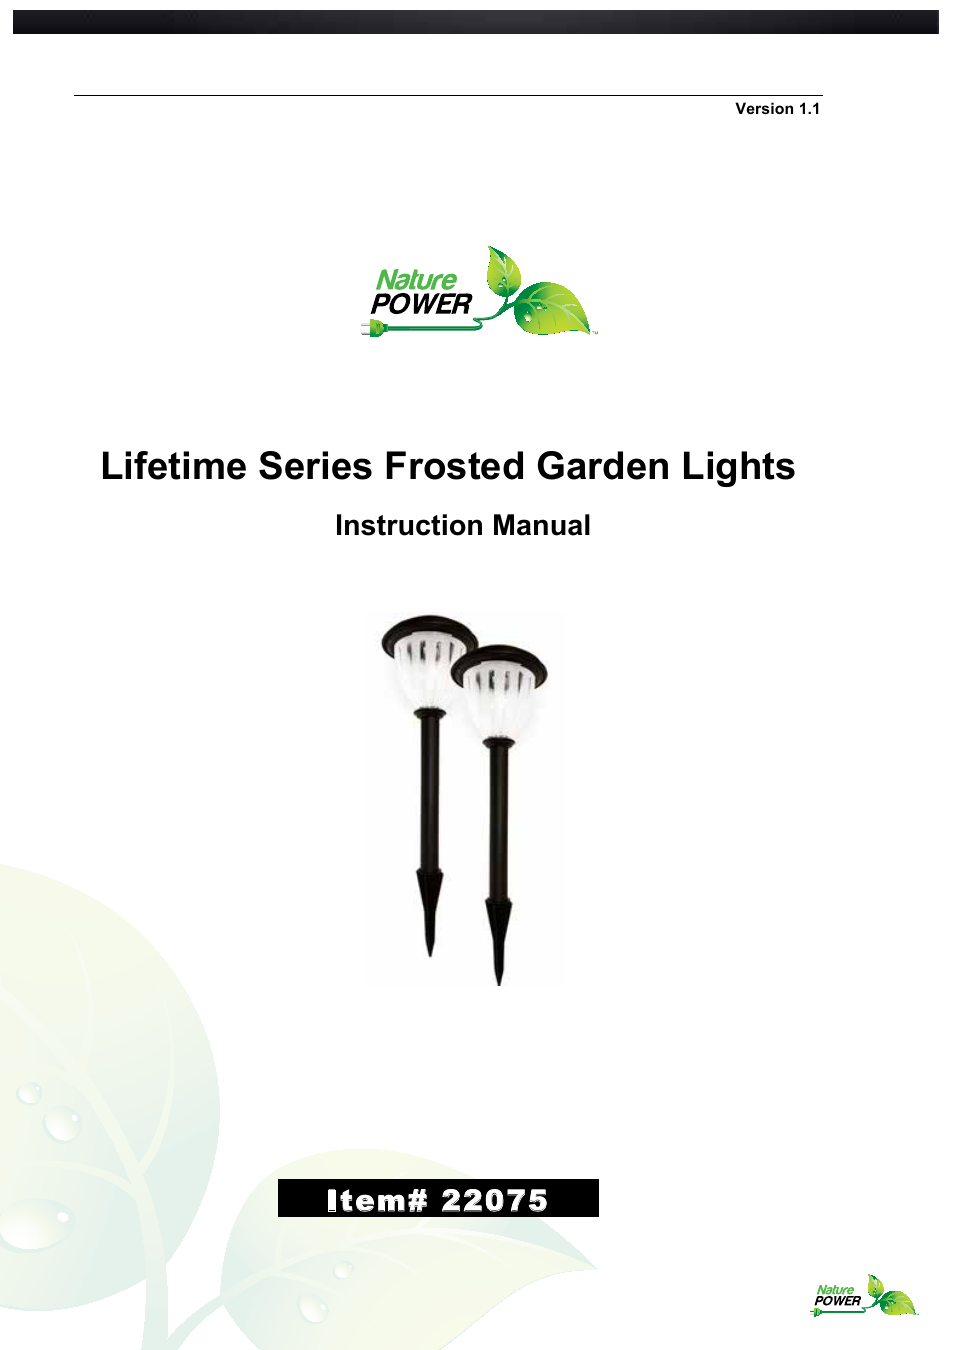 Lifetime Series Frosted Garden Lights (22075)